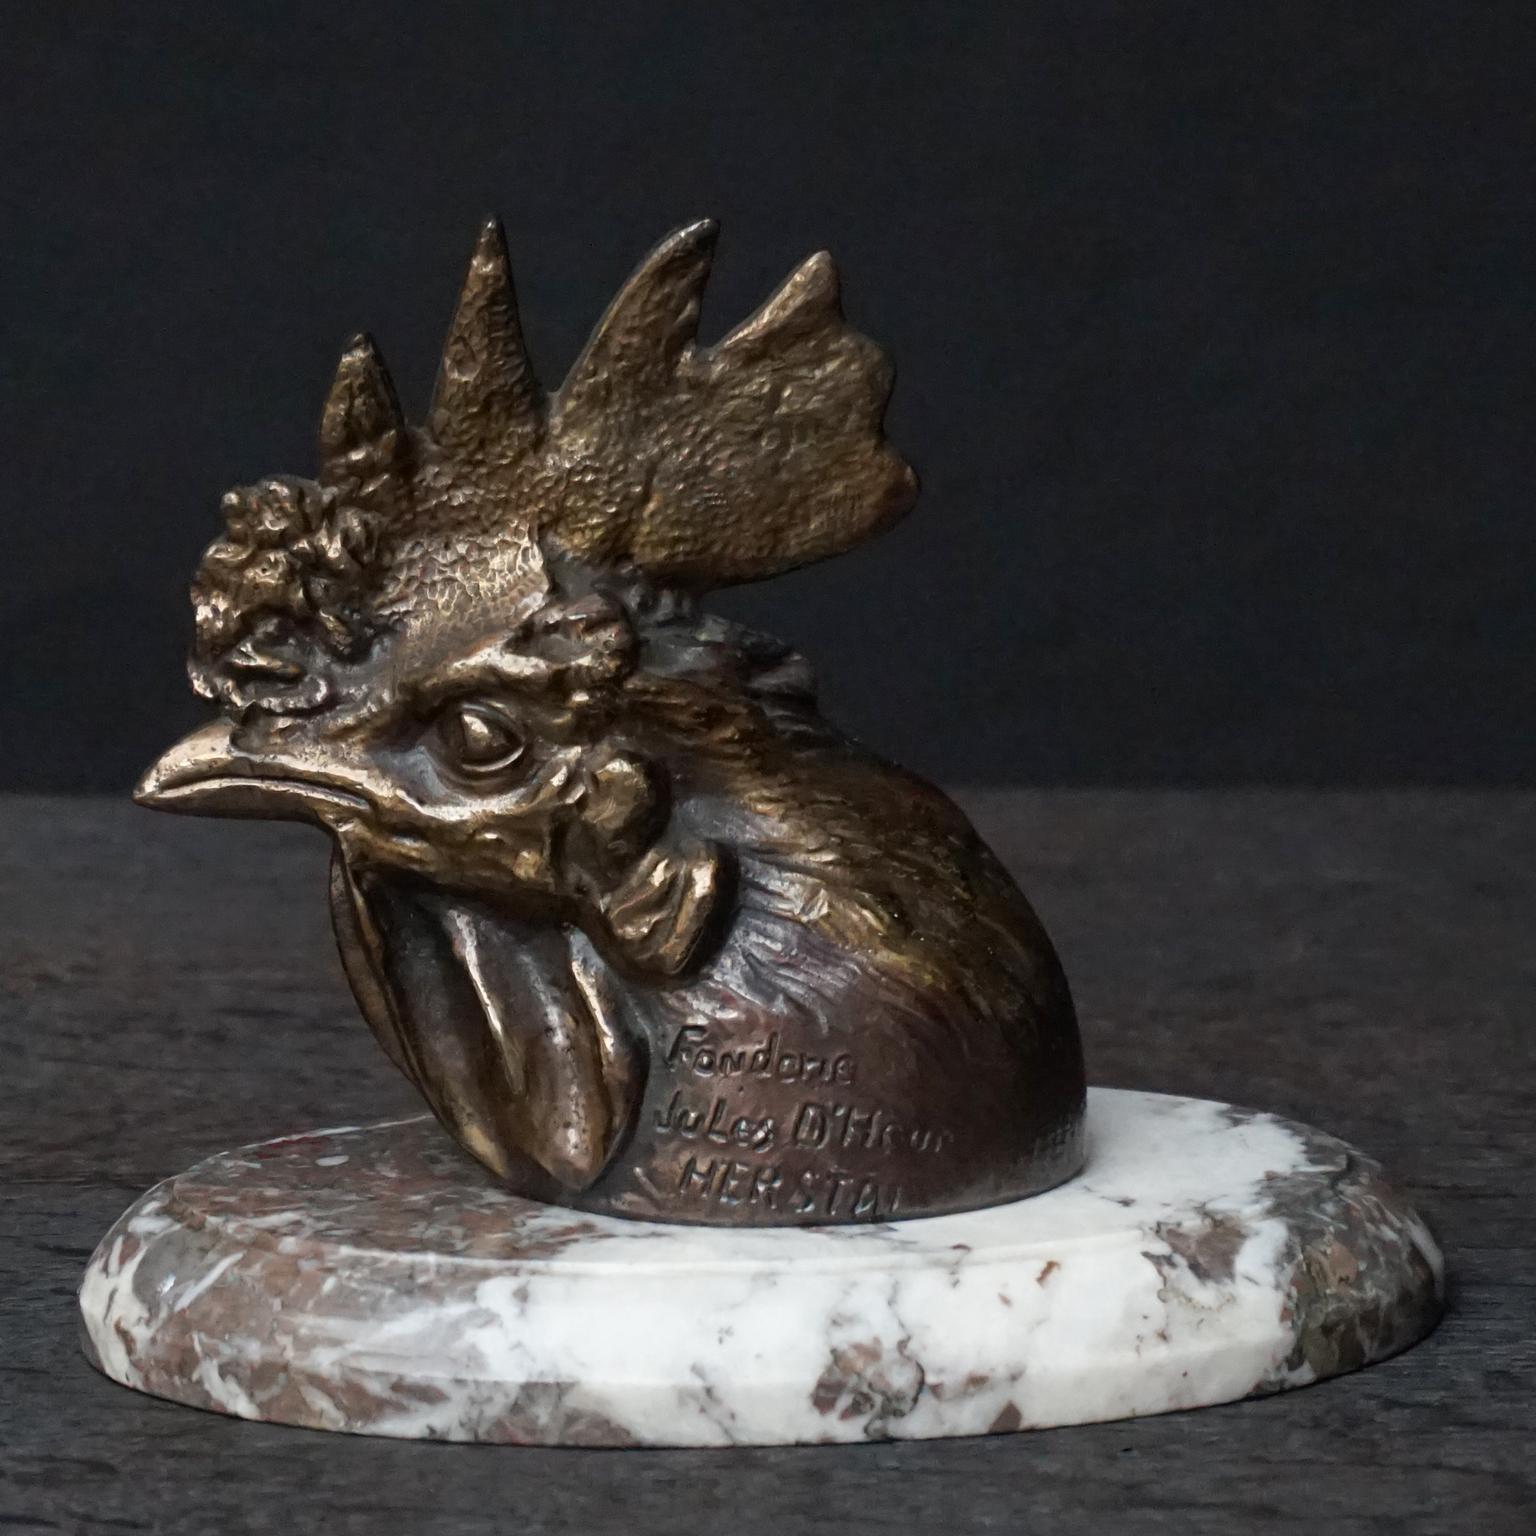 Solid bronze rooster or coq's head cast by Fonderie Jules D'Heur commissioned and cast in Belgium Herstal on a marble base.
Marked fonderie Jules D'Heur HERSTAL

Nice grounding piece for a stack of books.
  